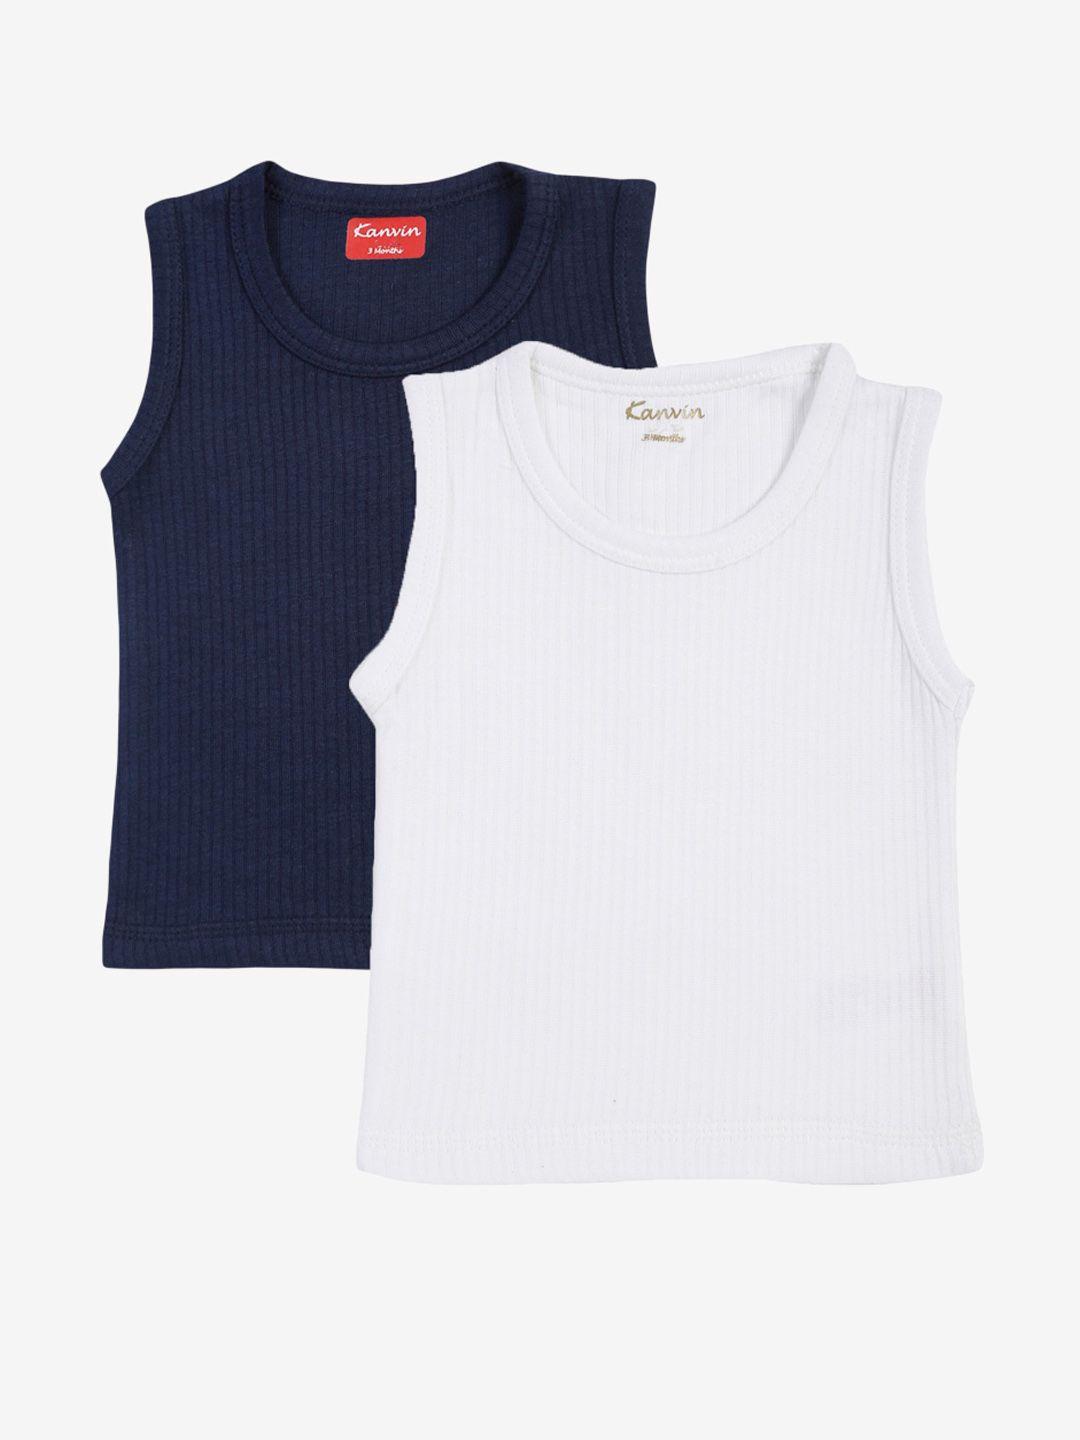 kanvin boys pack of 2 navy blue & white ribbed cotton thermal tops